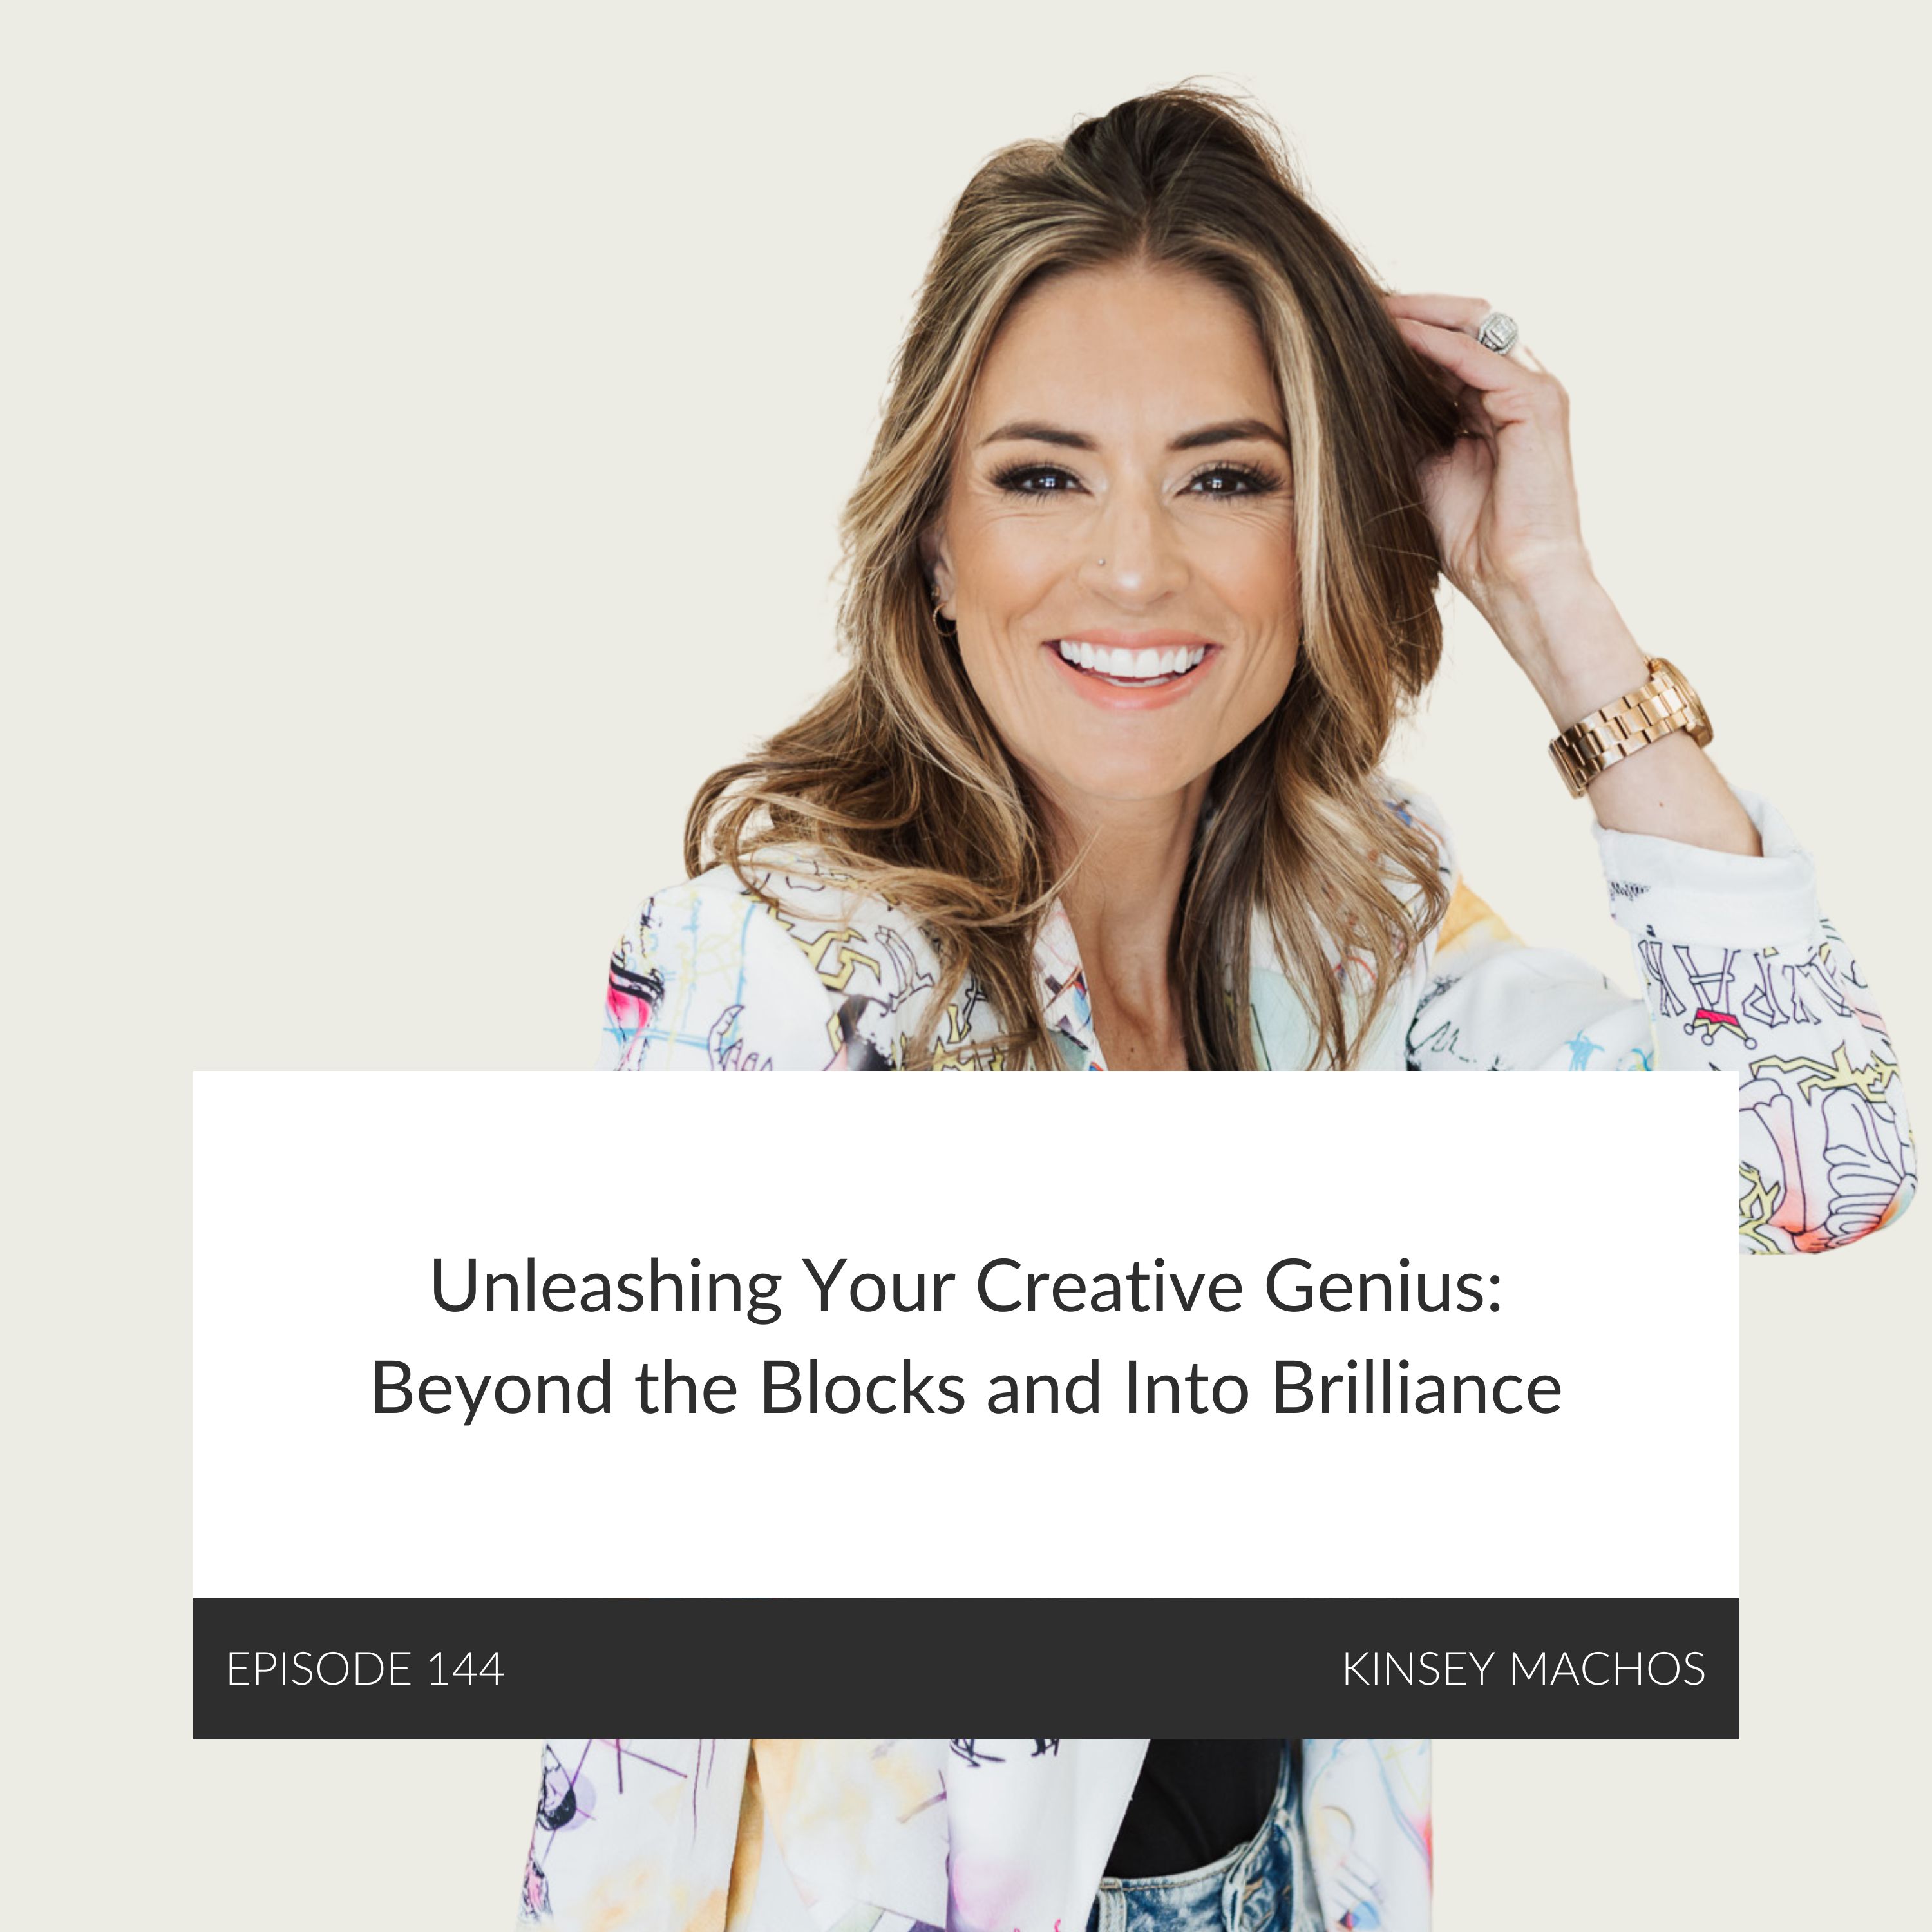 Unleashing Your Creative Genius: Beyond the Blocks and Into Brilliance